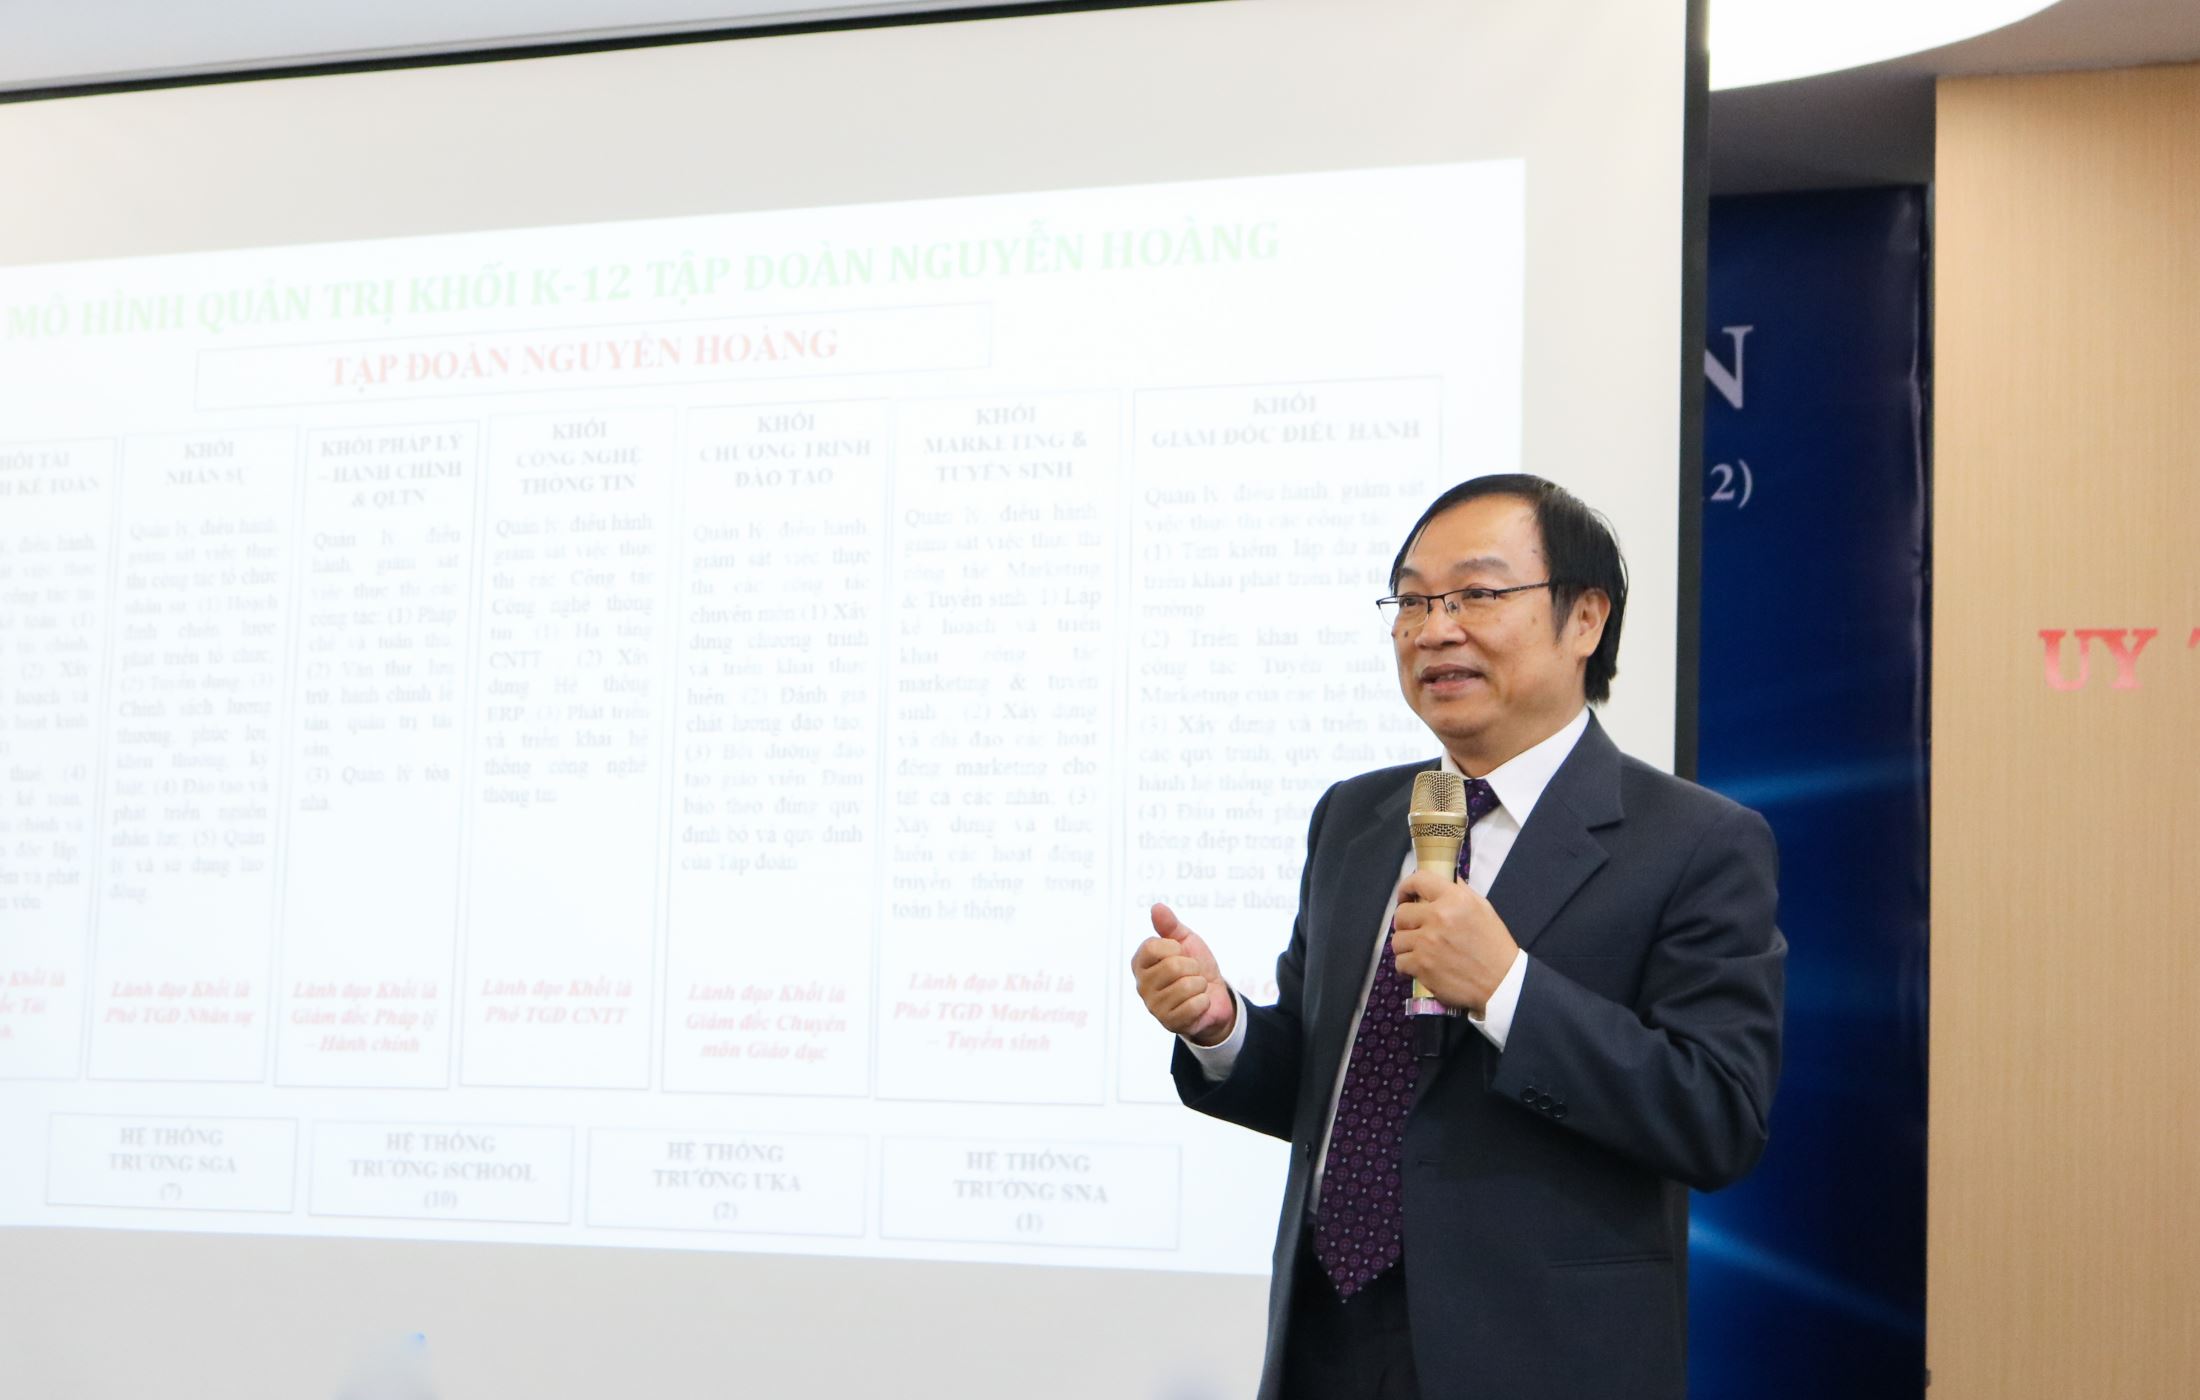 Dr. Dinh Quang Nuong – Deputy Chief Executive Officer explained outstanding advantages of the new operating structure